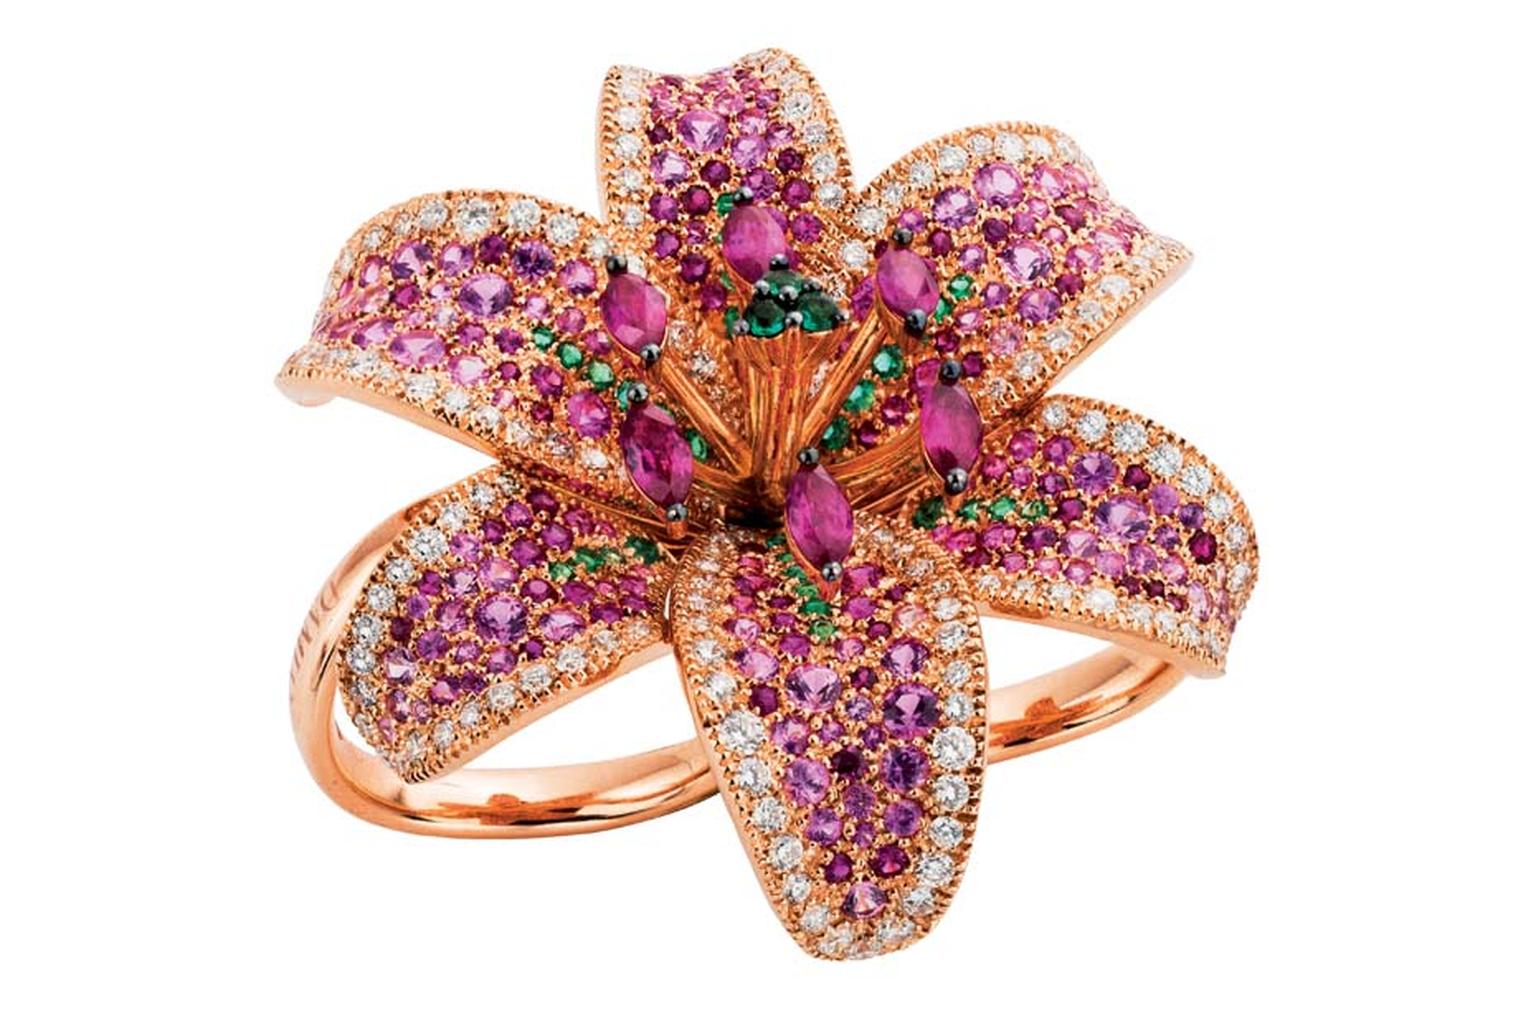 Damiani ring from the new Giglio high jewellery collection,